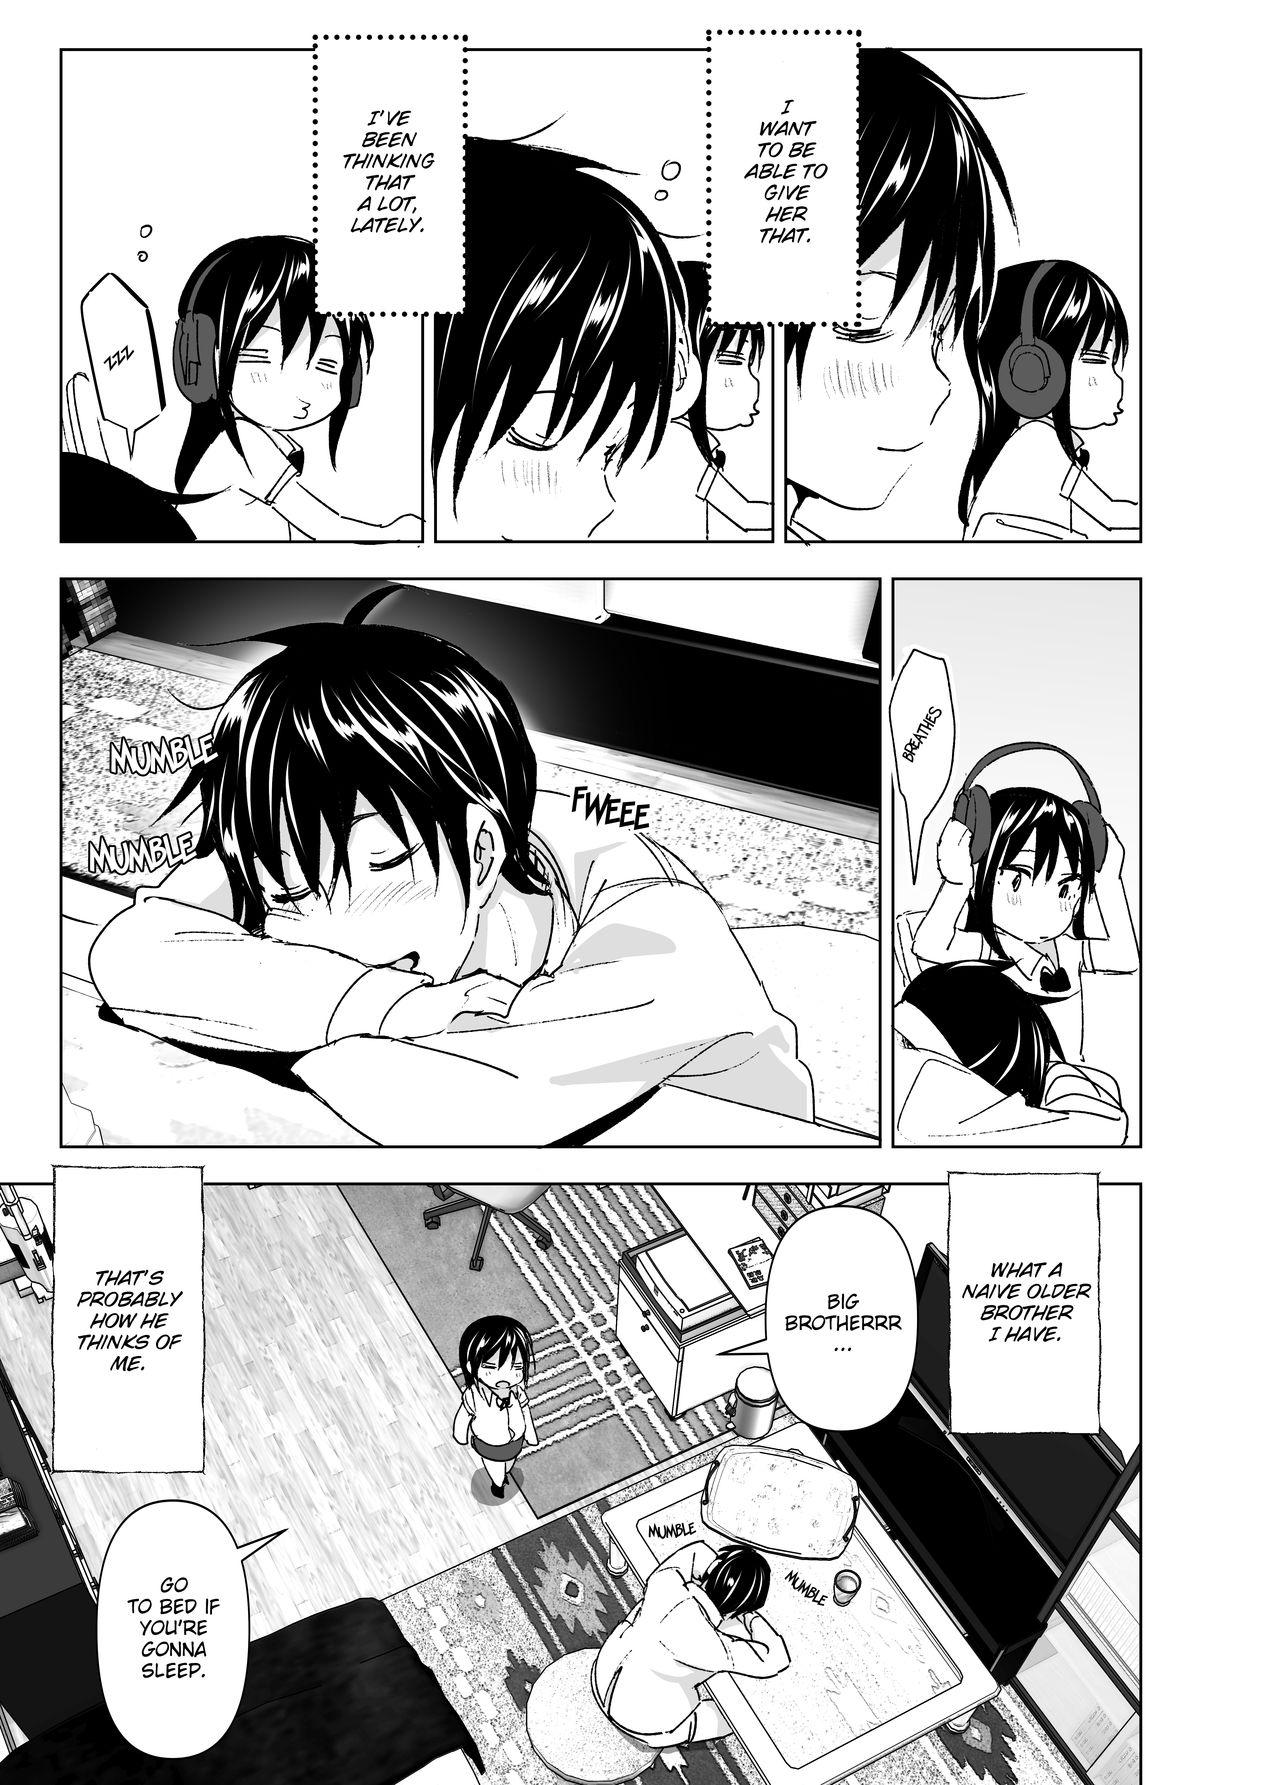 Hard Onii-chan to Issho! | Hanging Out! With My Big Brother - Original Dando - Page 7